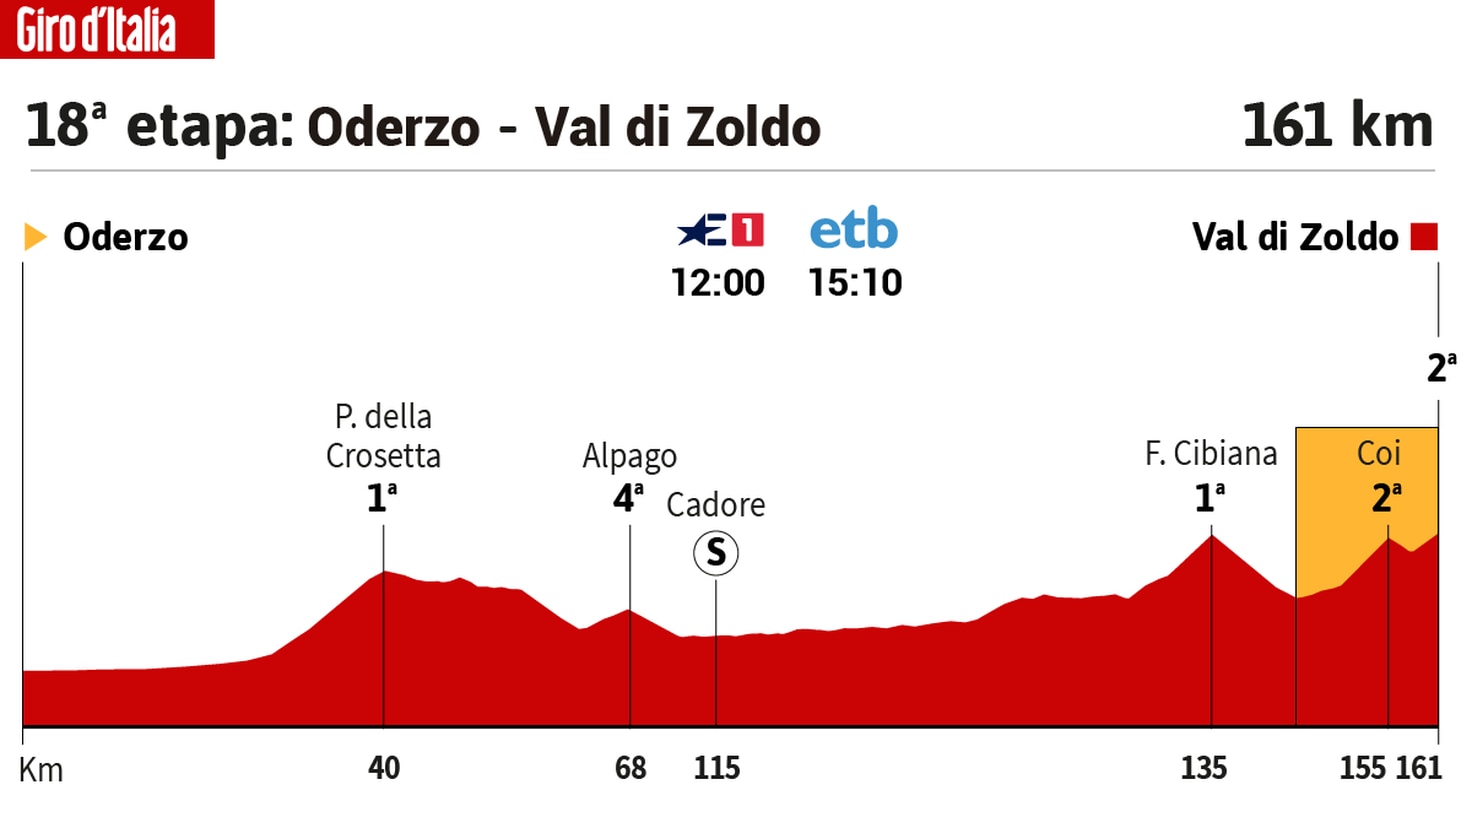 Giro d'Italia today, stage 18: schedule, profile and route
